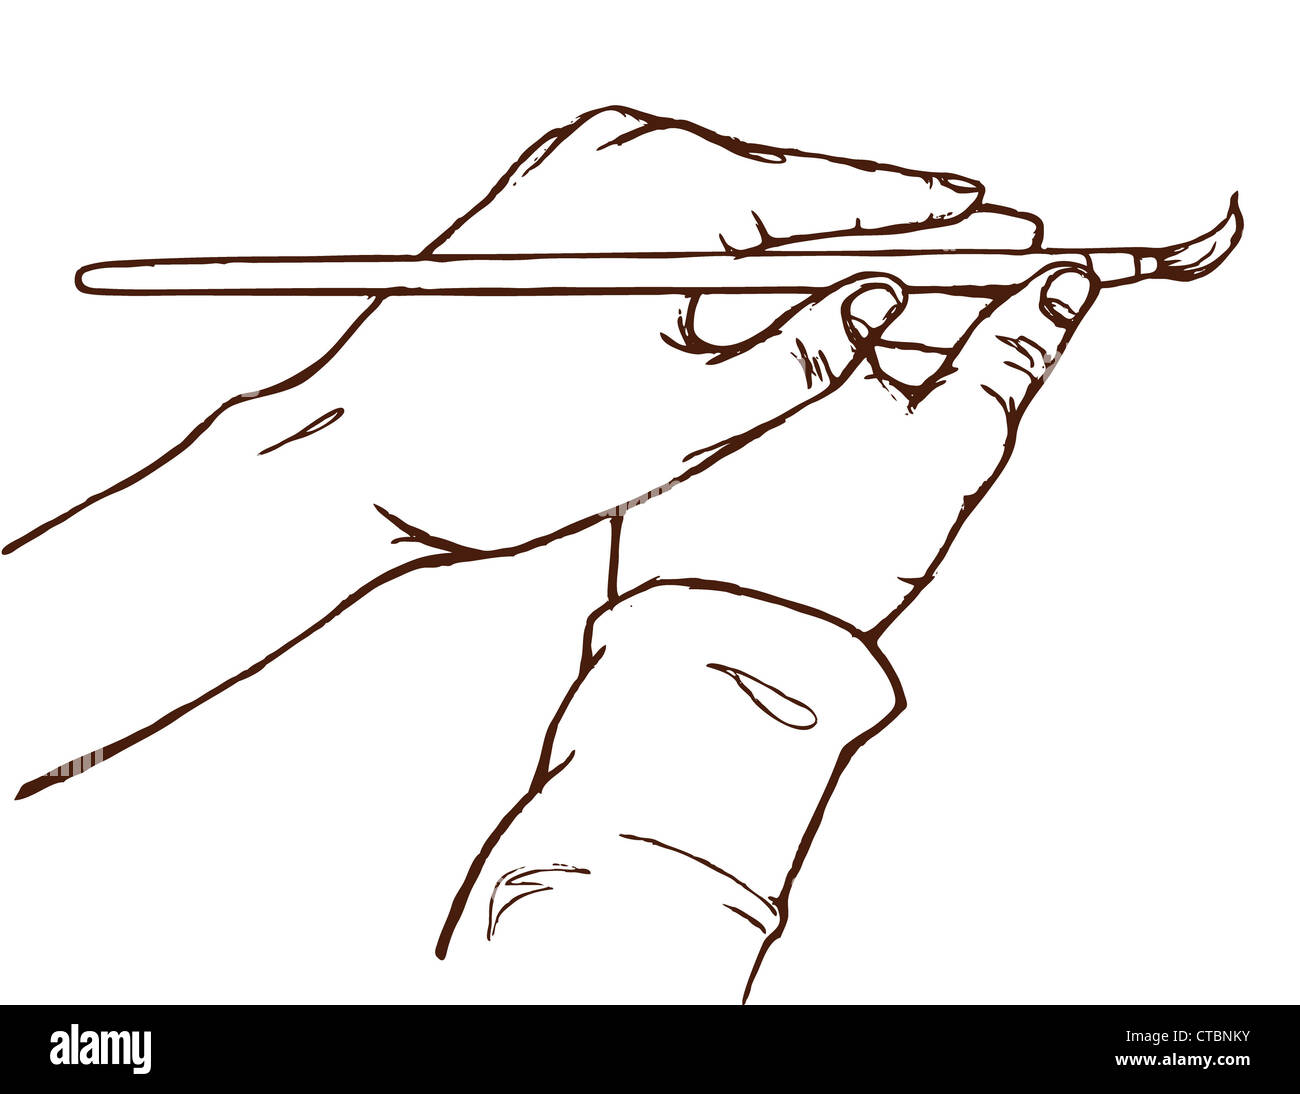 Line drawing of hands and paintbrush. Stock Photo